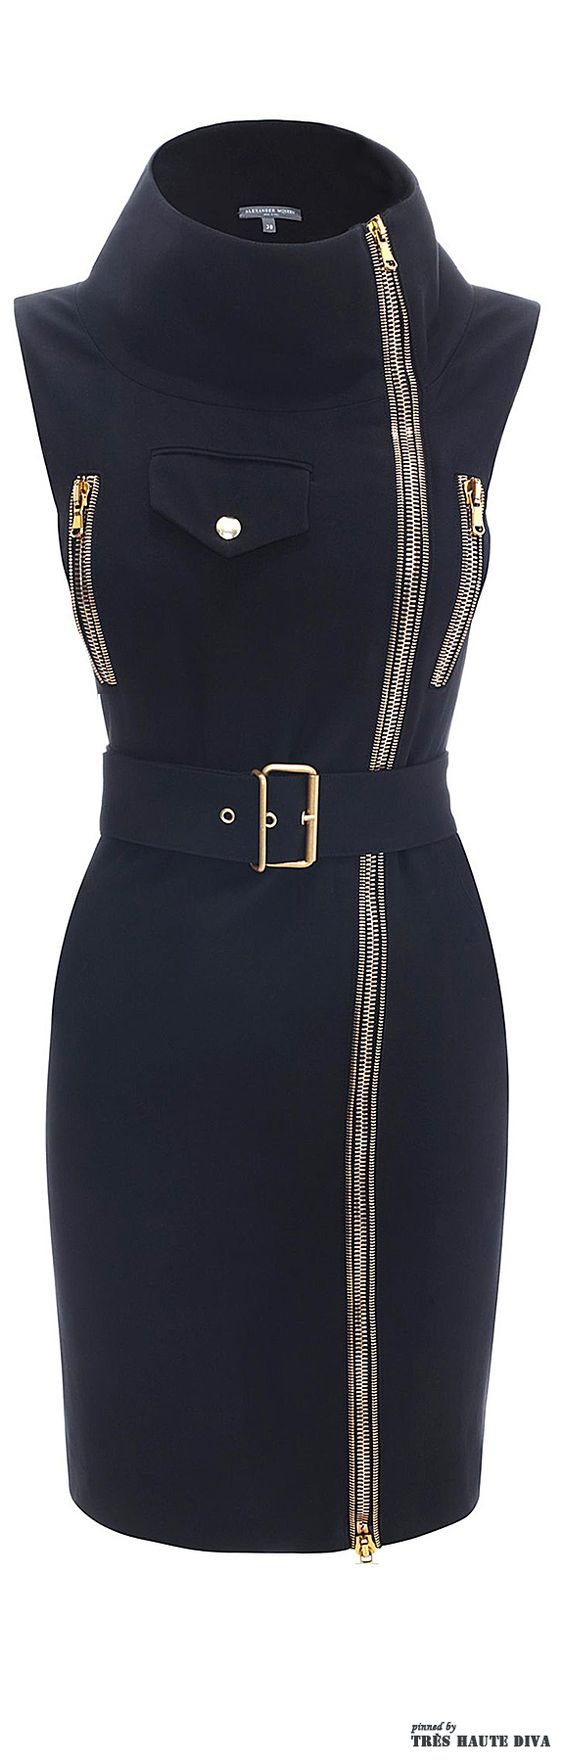 Image of: Military inspired dress with zippers